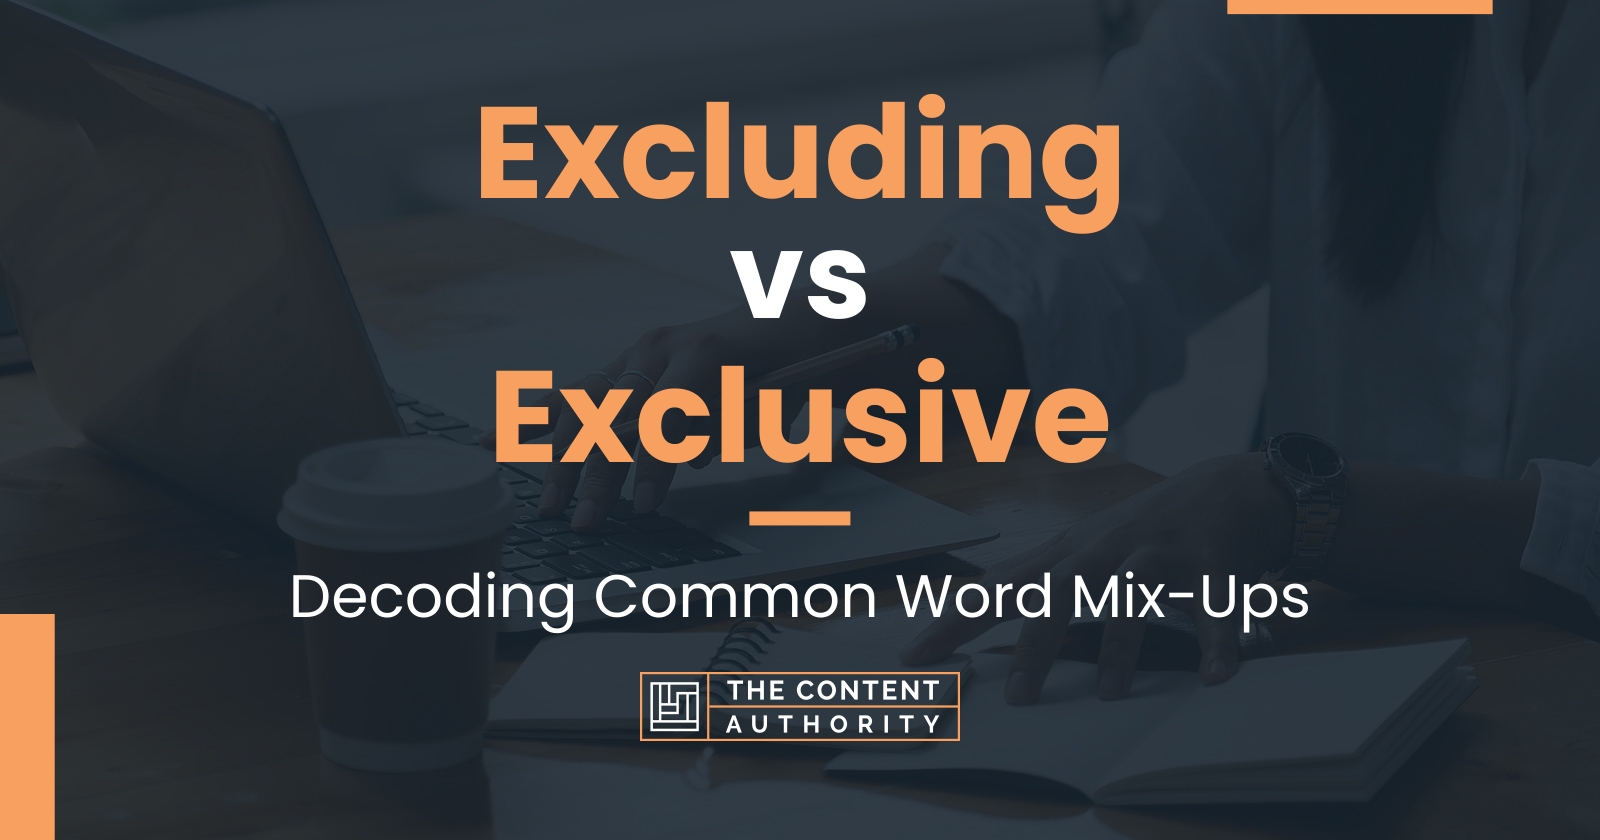 Excluding vs Exclusive: Decoding Common Word Mix-Ups